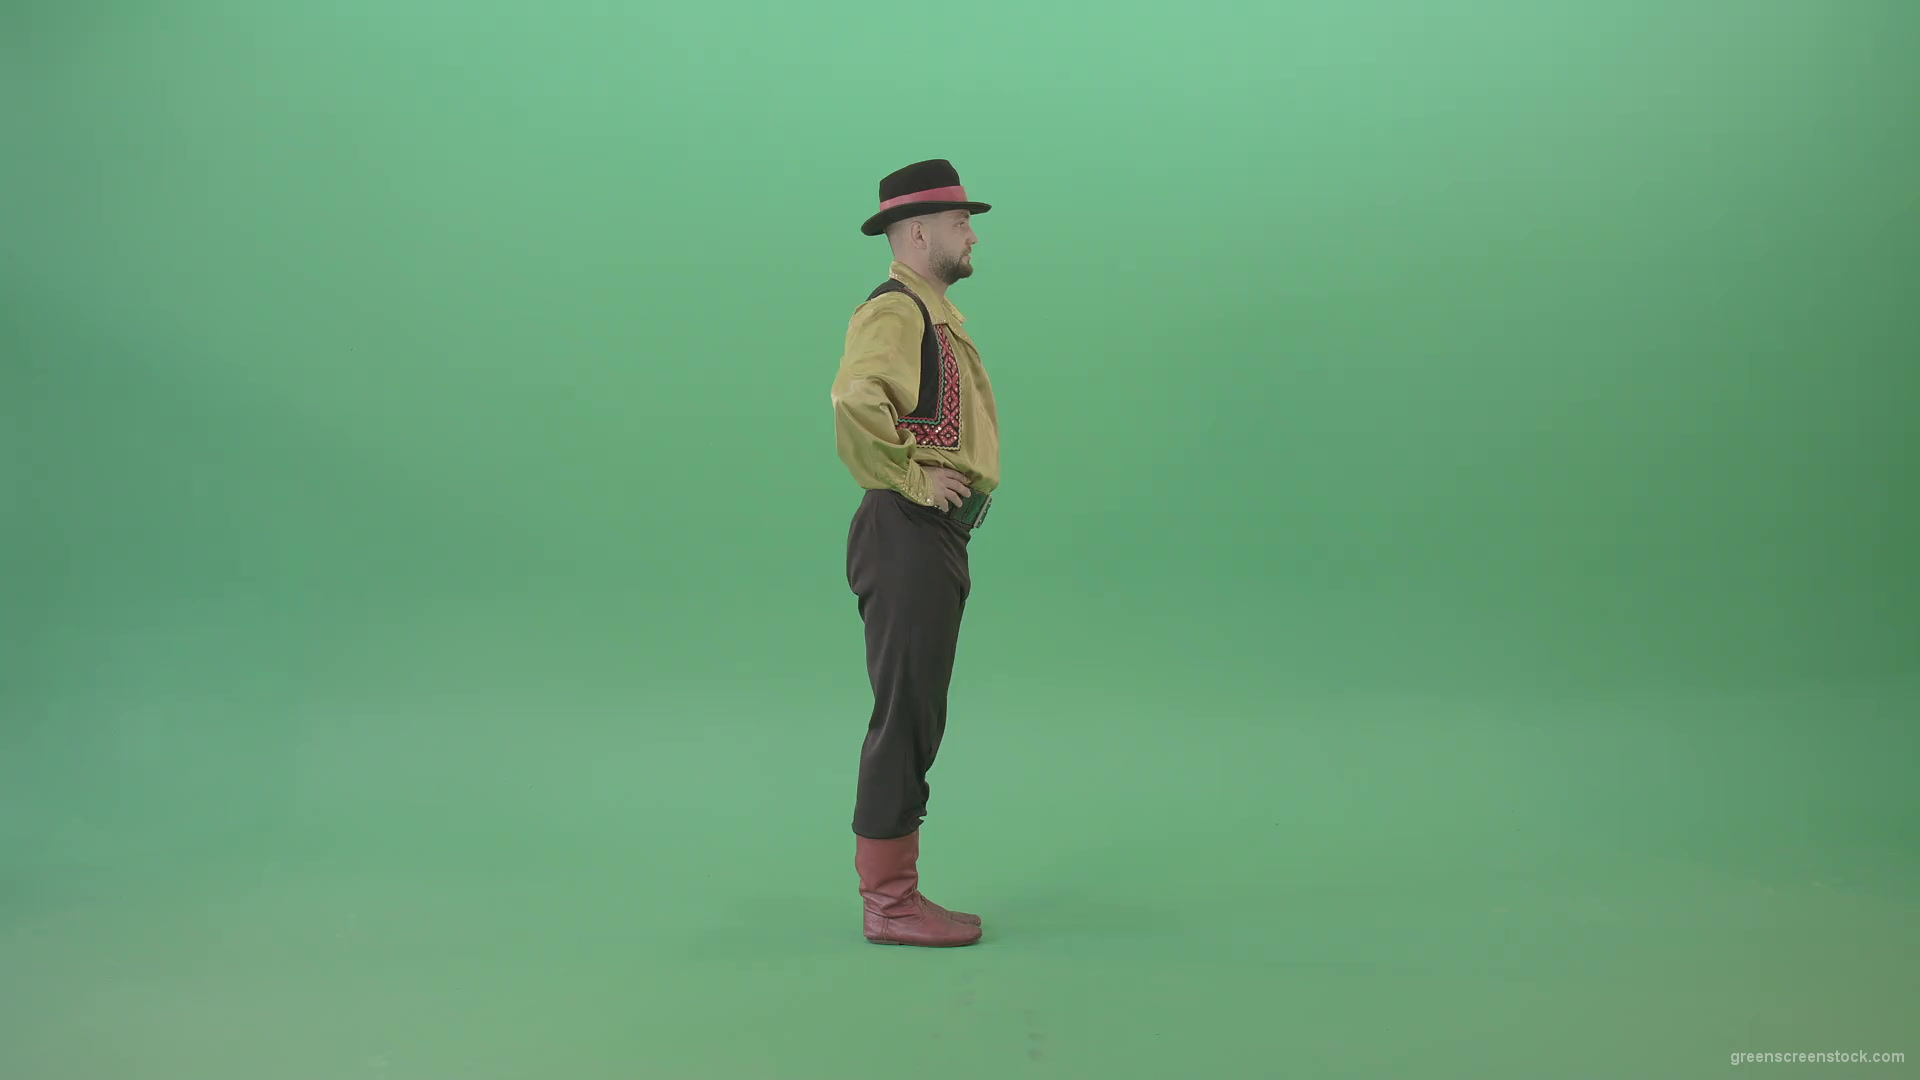 Romanian-Gypsy-Man-dancing-with-clapping-hand-with-side-view-isolated-4K-Green-Screen-Video-Footage-1920_001 Green Screen Stock